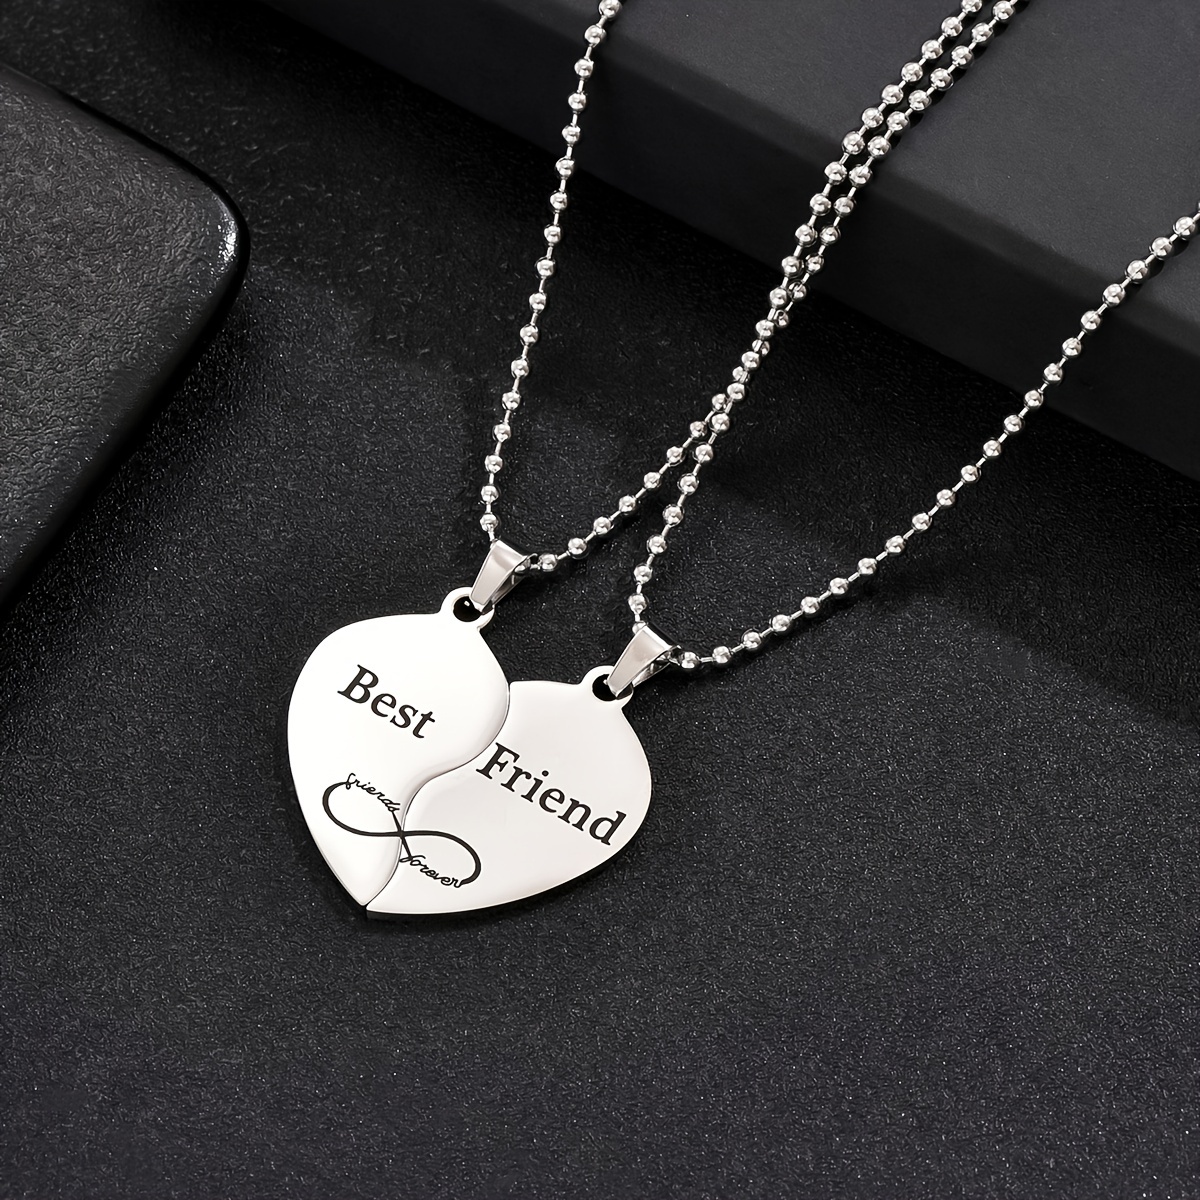 2x Matching Necklace for Best Friends Personalized Magnet Heart Pendant Necklace Engraved Gift for Kid Children, Girl's, Grey Type